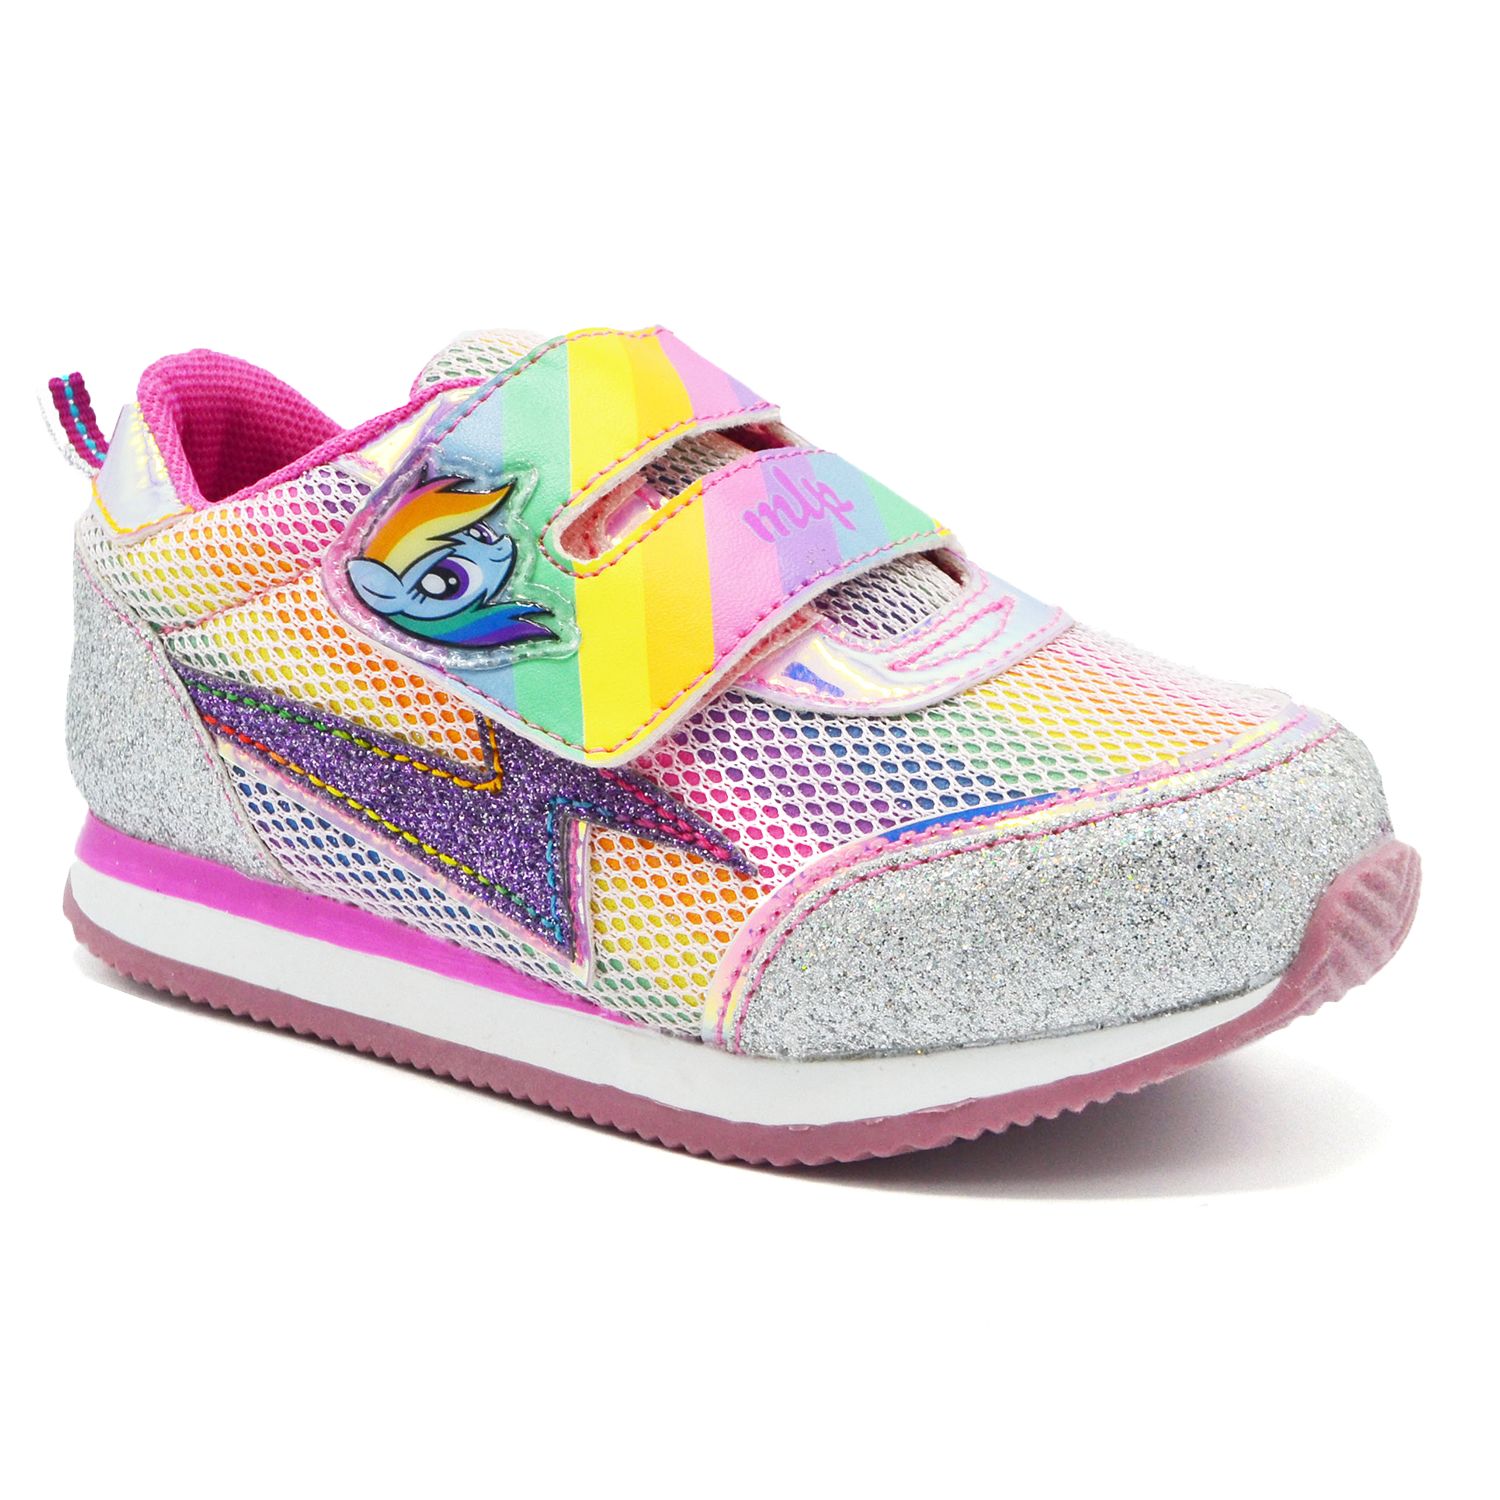 rainbow shoes for little girls